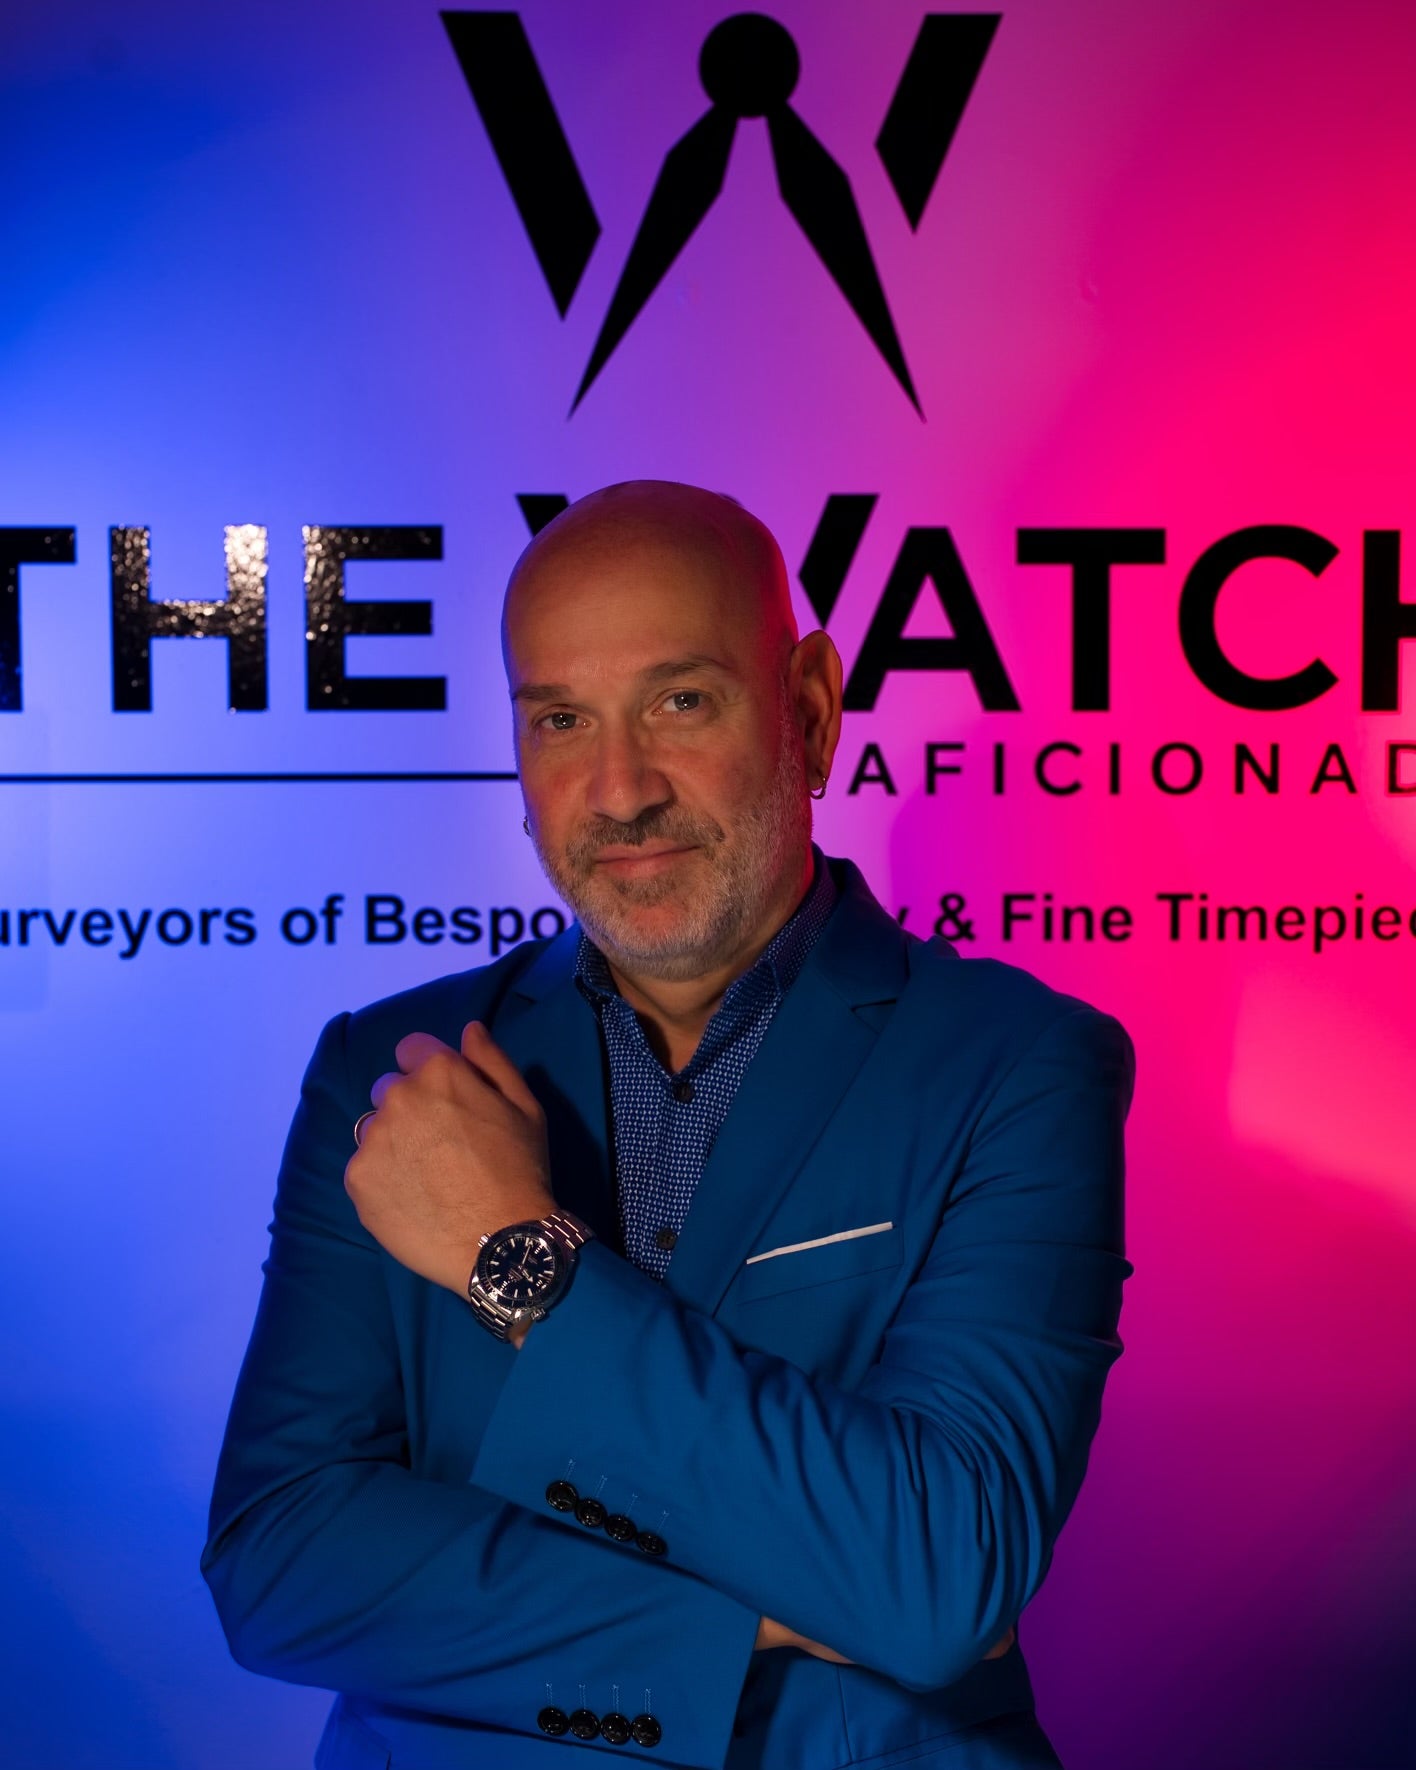 Load video: Welcome To The Watch Aficionado